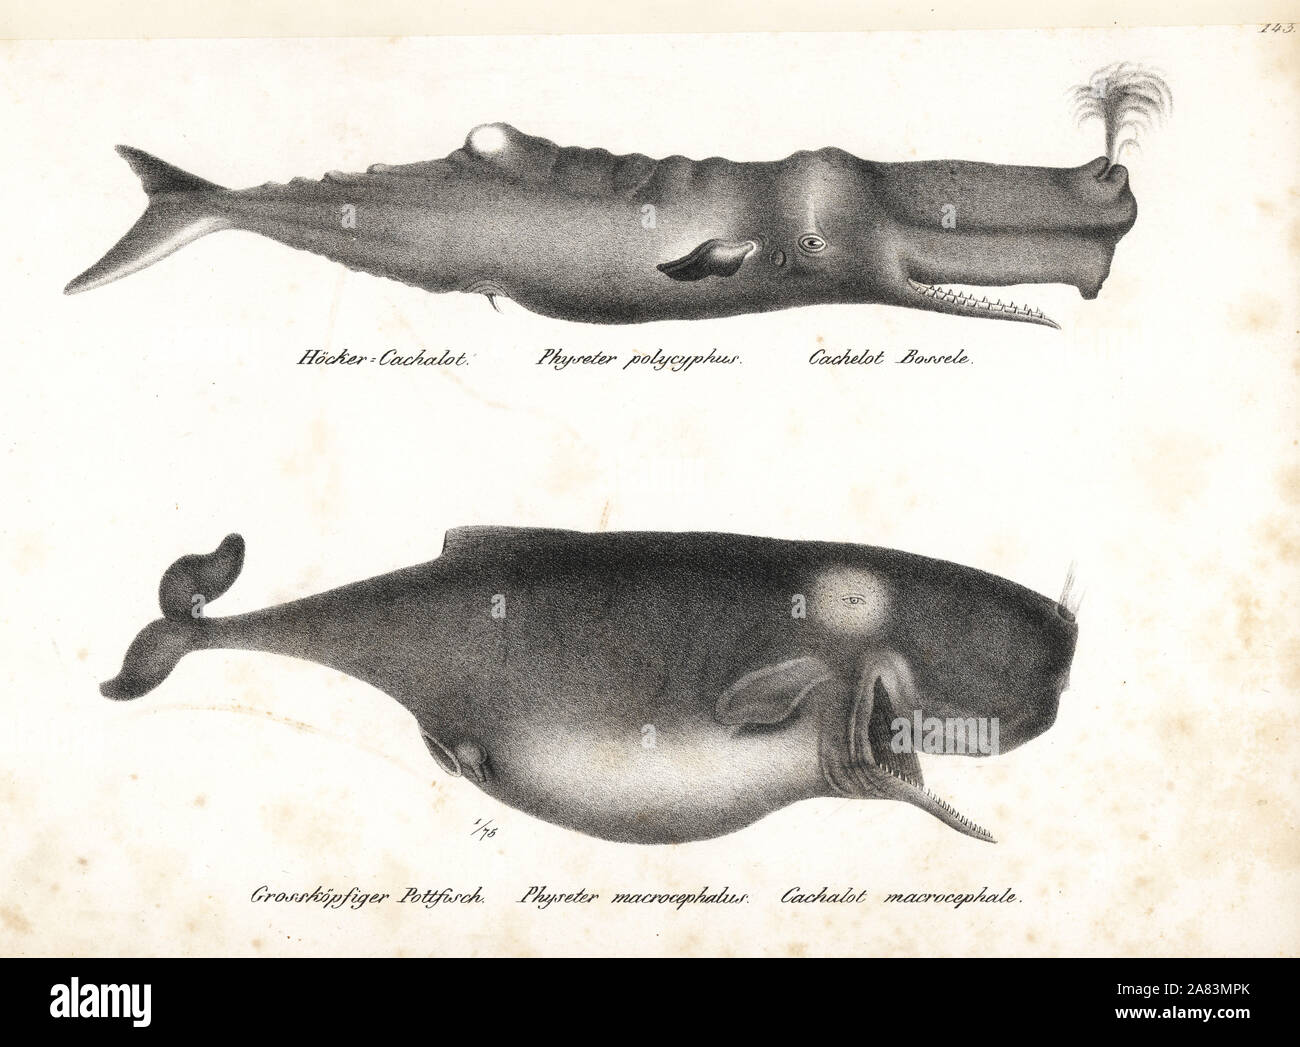 Sperm whale or cachalot, Physeter macrocephalus (Physeter polycyphus). Vulnerable. Lithograph by Karl Joseph Brodtmann from Heinrich Rudolf Schinz's Illustrated Natural History of Men and Animals, 1836. Stock Photo